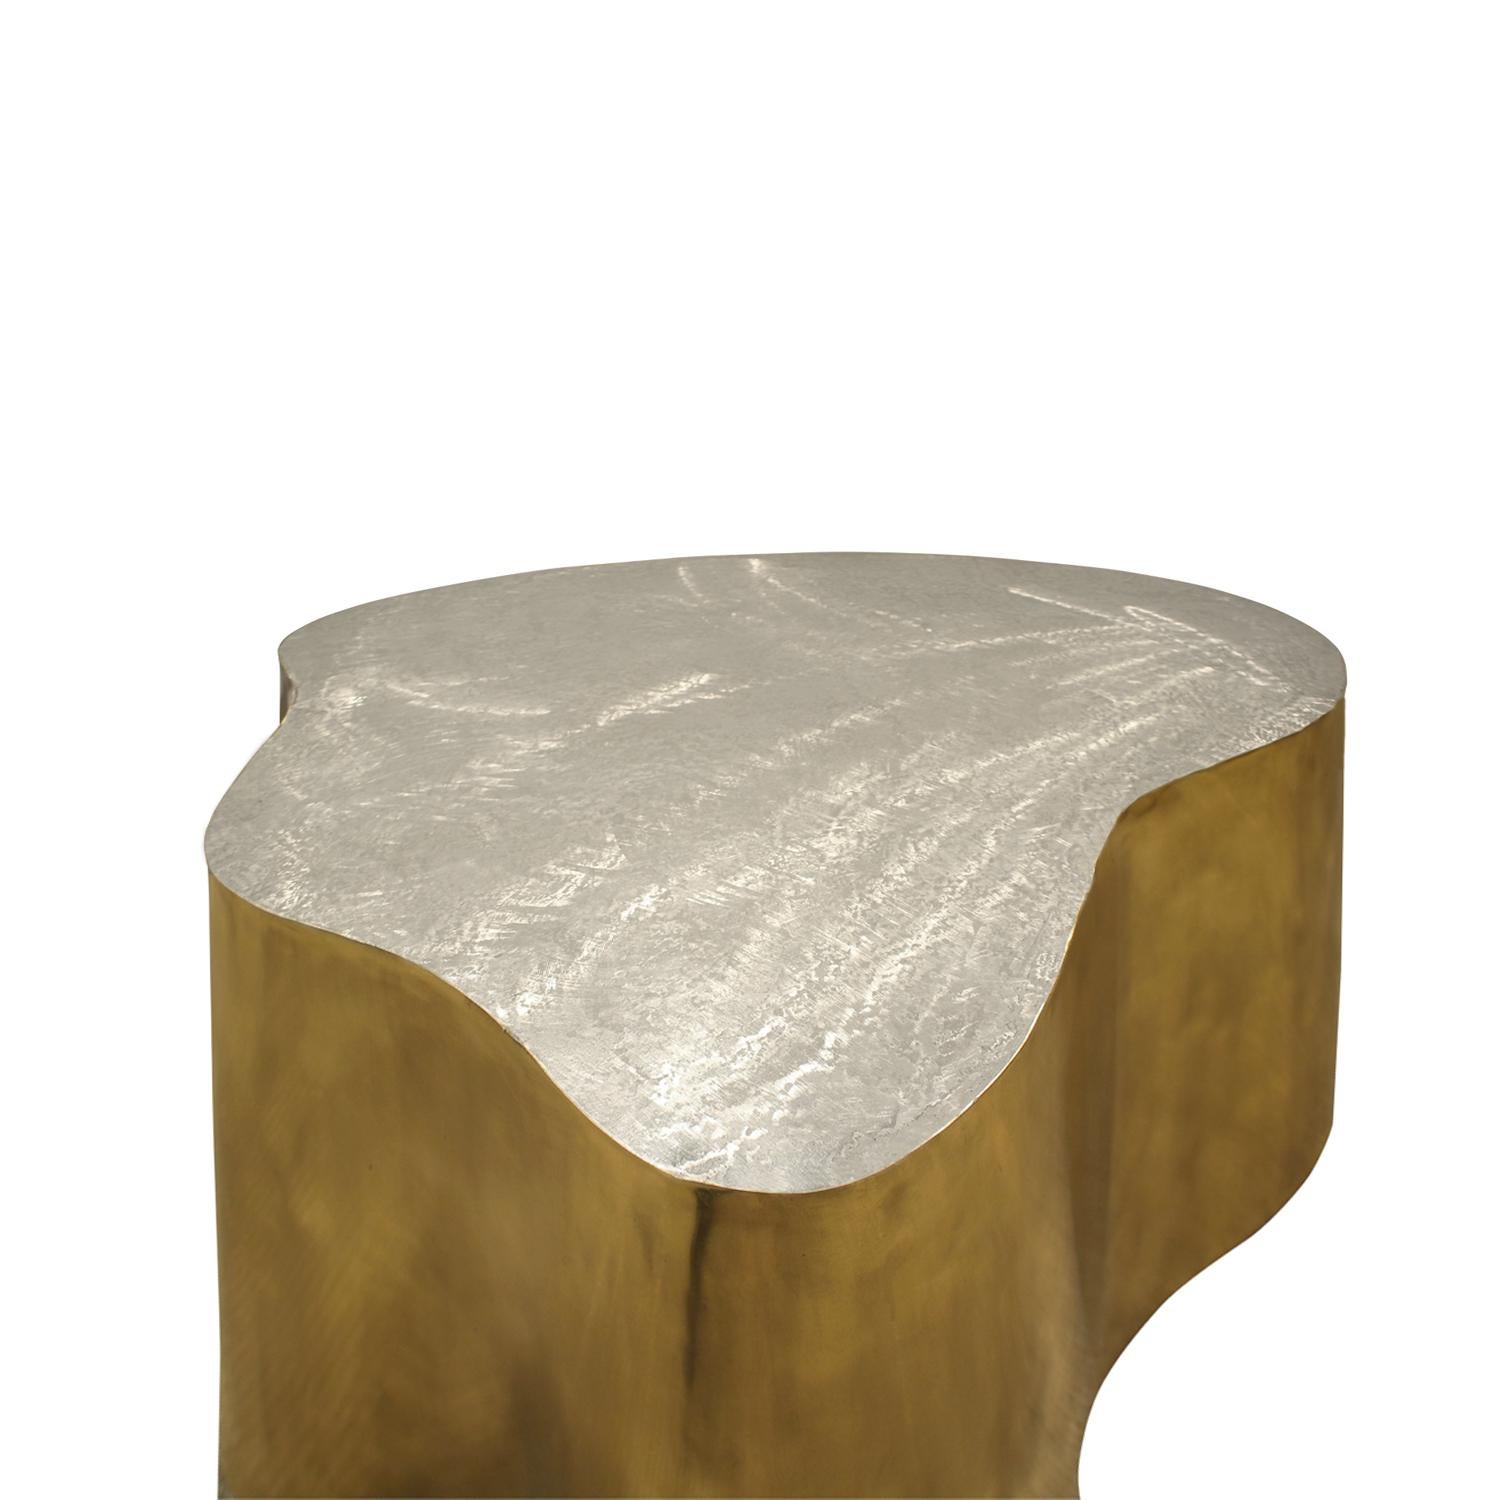 Hand-Crafted Silas Seandel Pair of Coffee Tables in Brass and Brushed Steel, 1980s 'Signed'